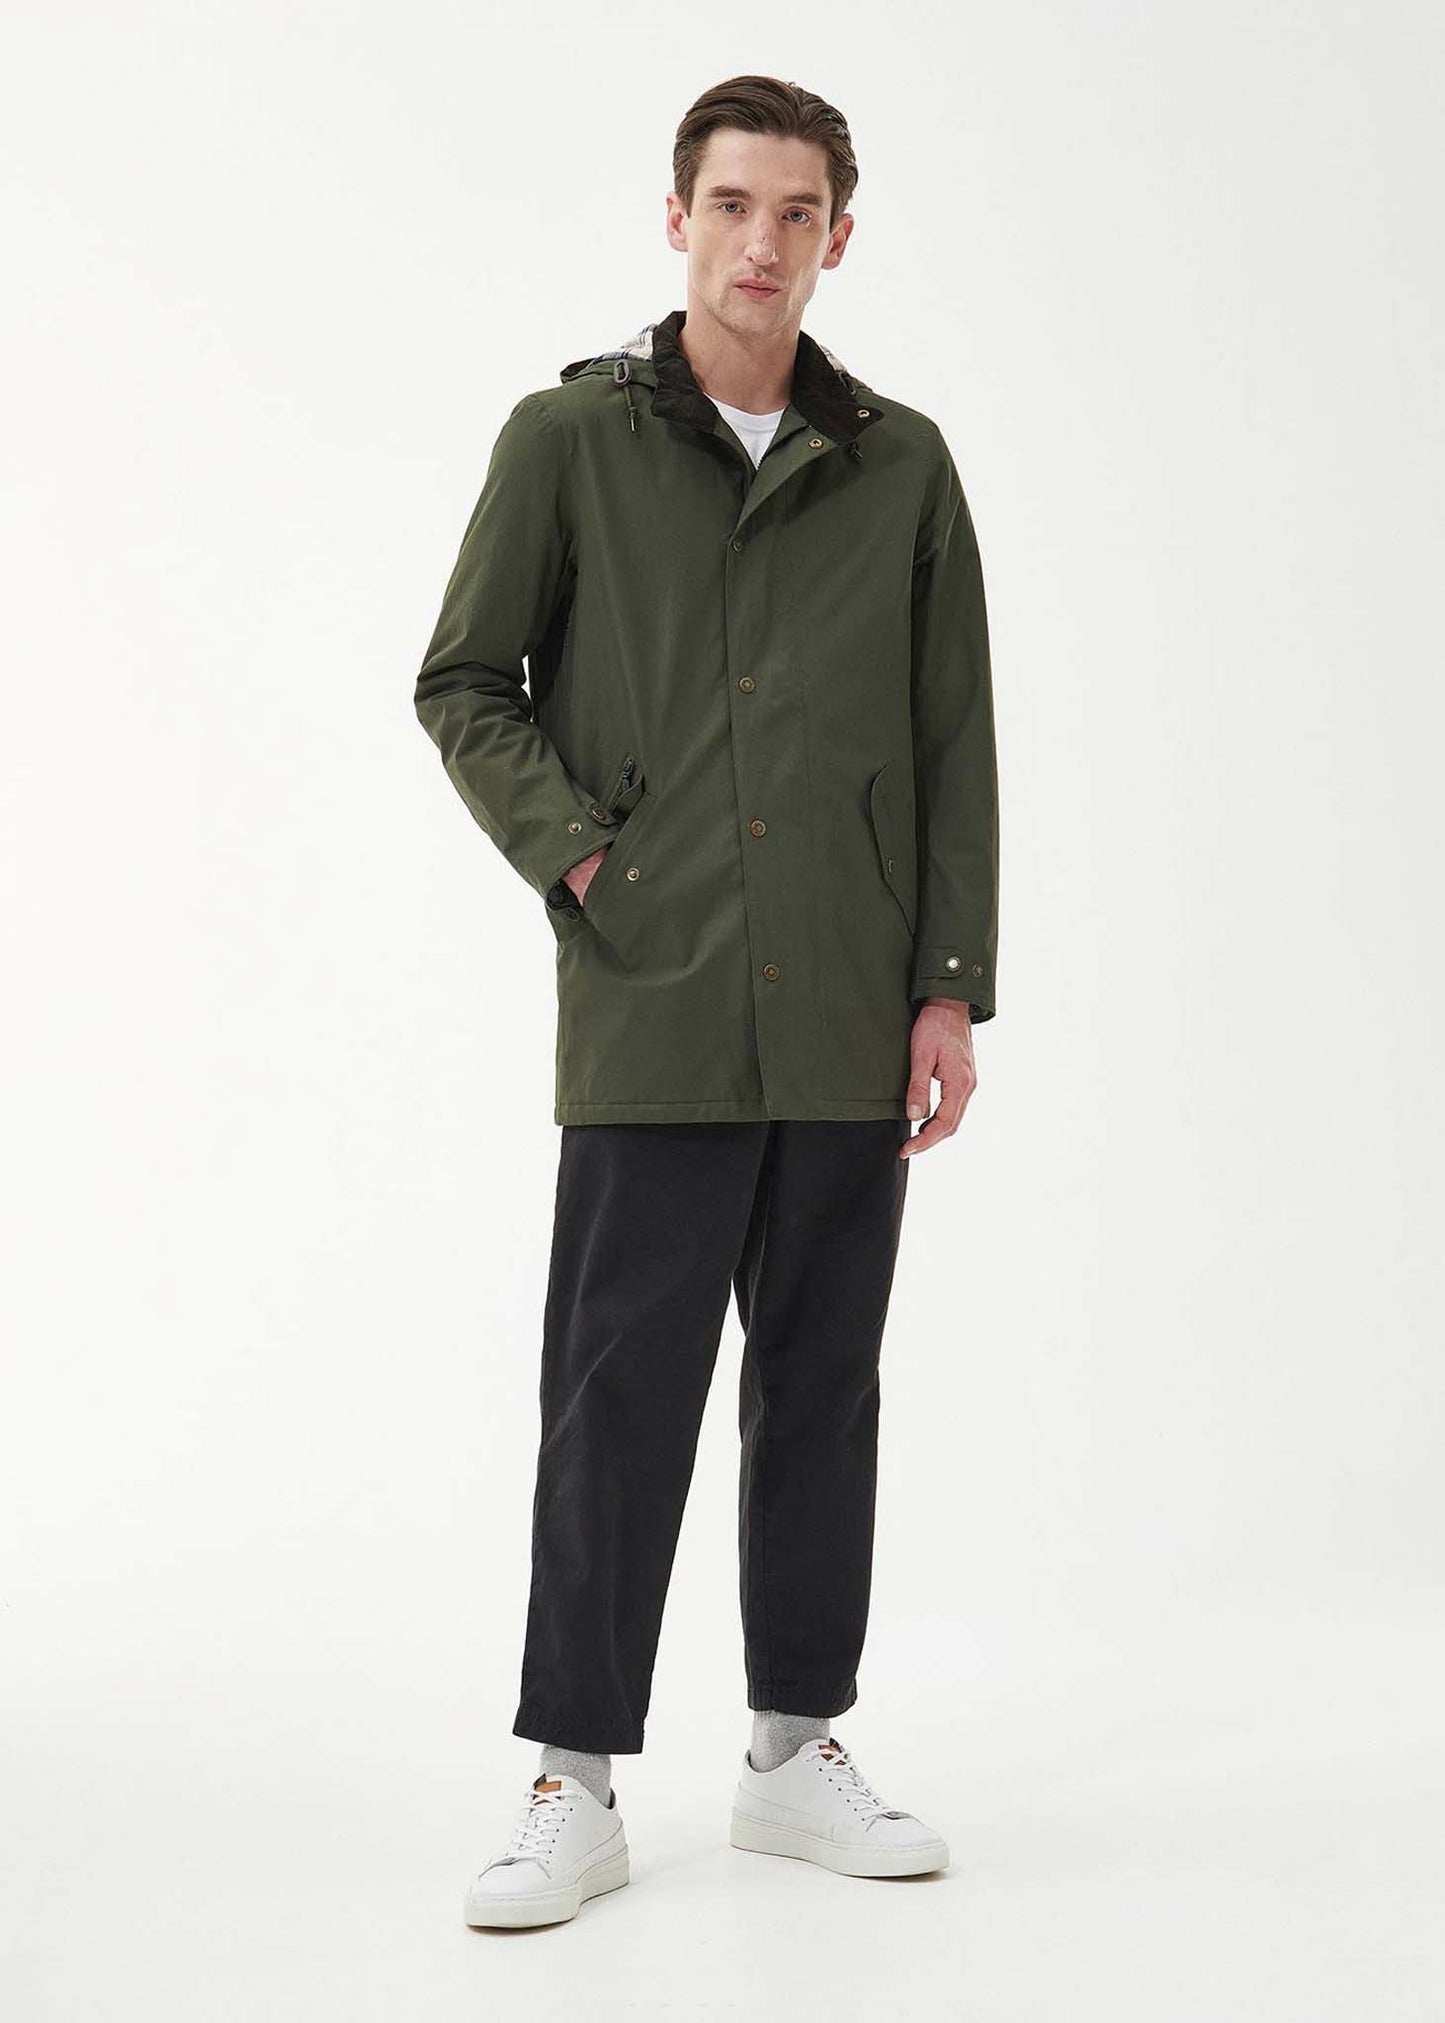 Chelsea mac jacket - olive forest mist